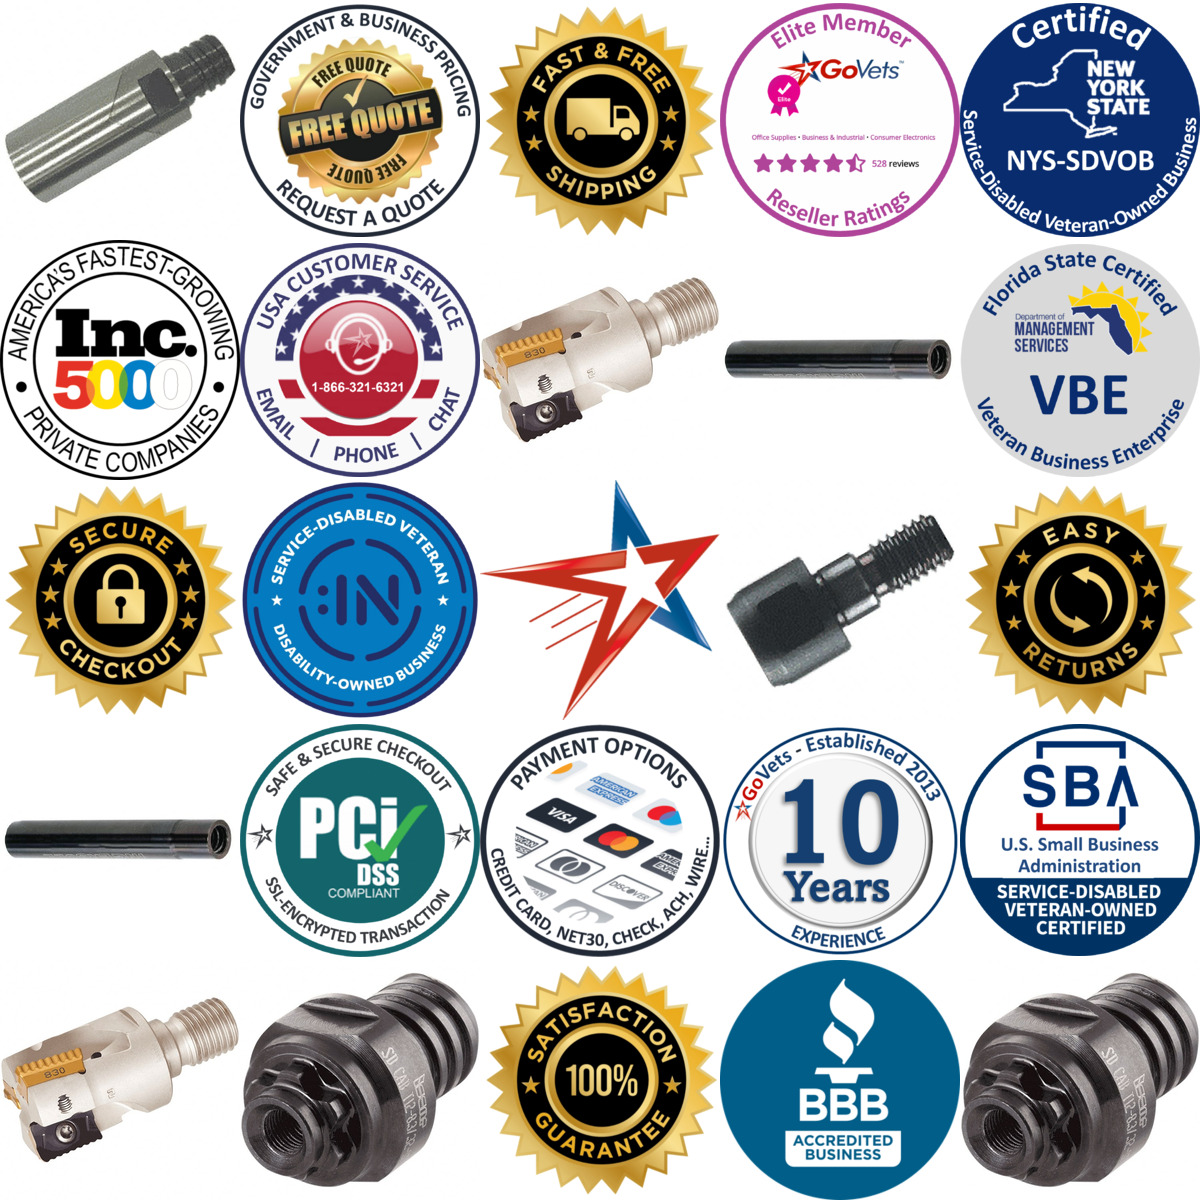 A selection of Milling Tip Insert Threaded Extensions products on GoVets